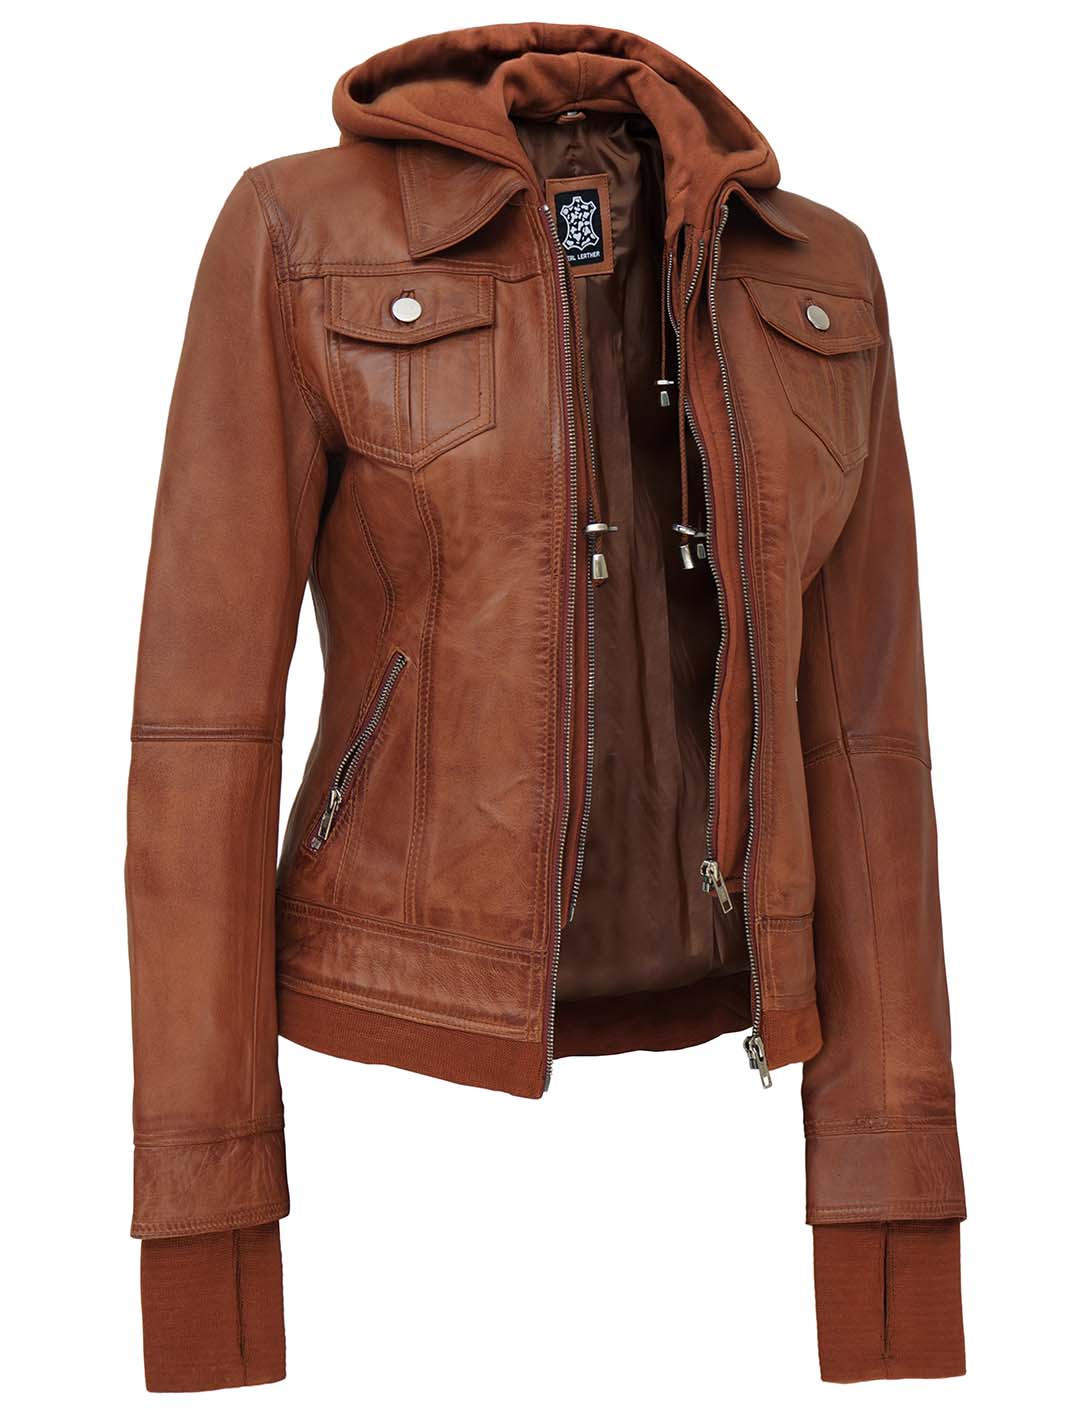 Brown Leather Jacket Women With Hood